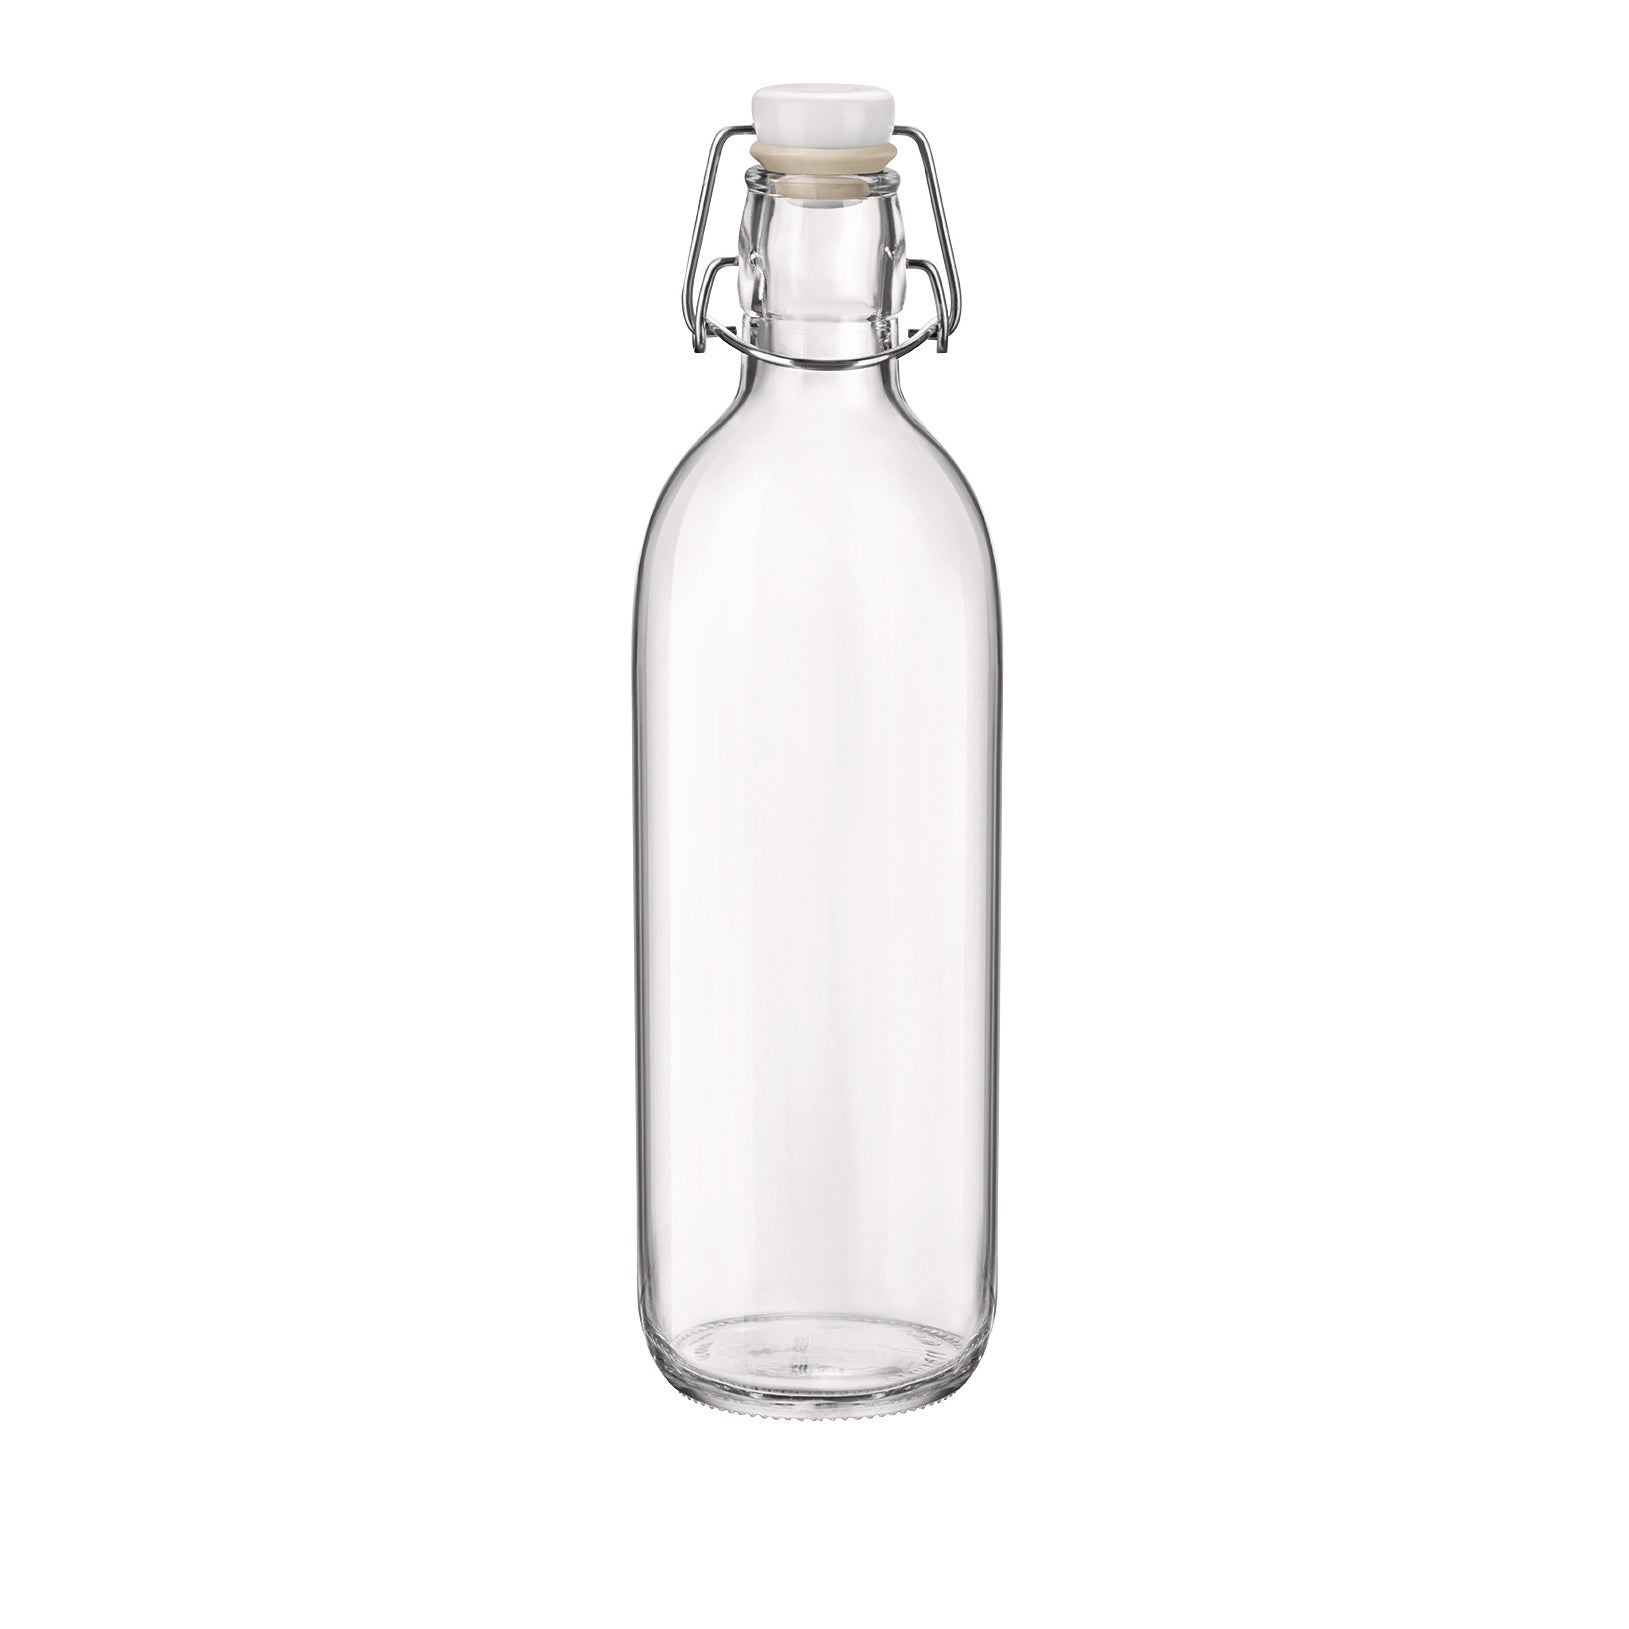 20 oz Borosilicate Glass Water Bottle with Silicone Sleeve - LPFZ727 -  IdeaStage Promotional Products